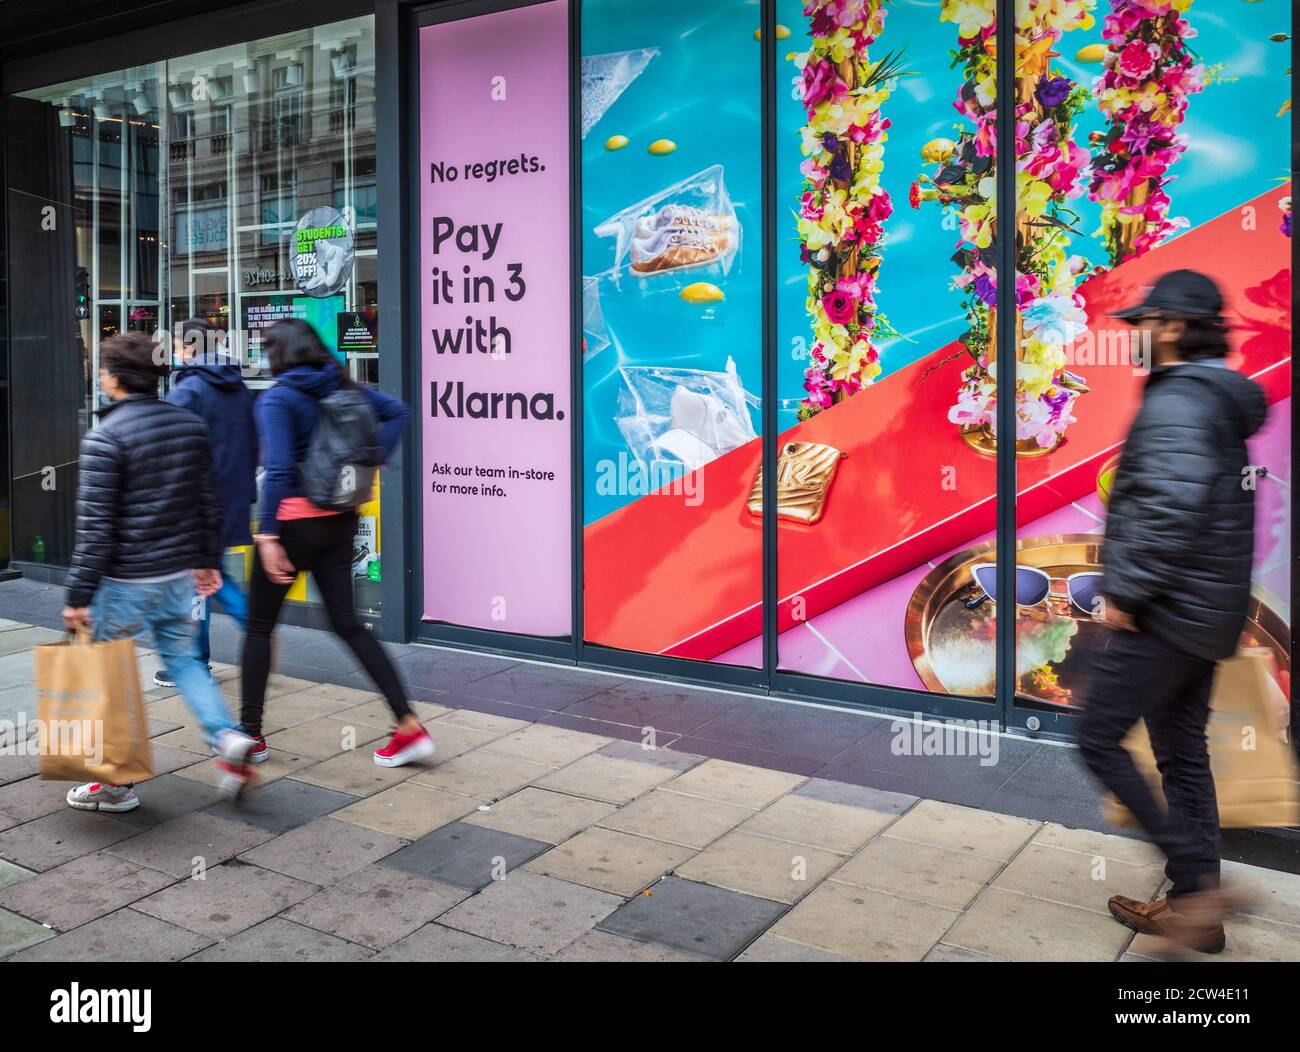 Klarna credit payment scheme. Advertising Klarna available in a store on London Oxford St. Klarna is a buy now pay later system popular with the young. Stock Photo